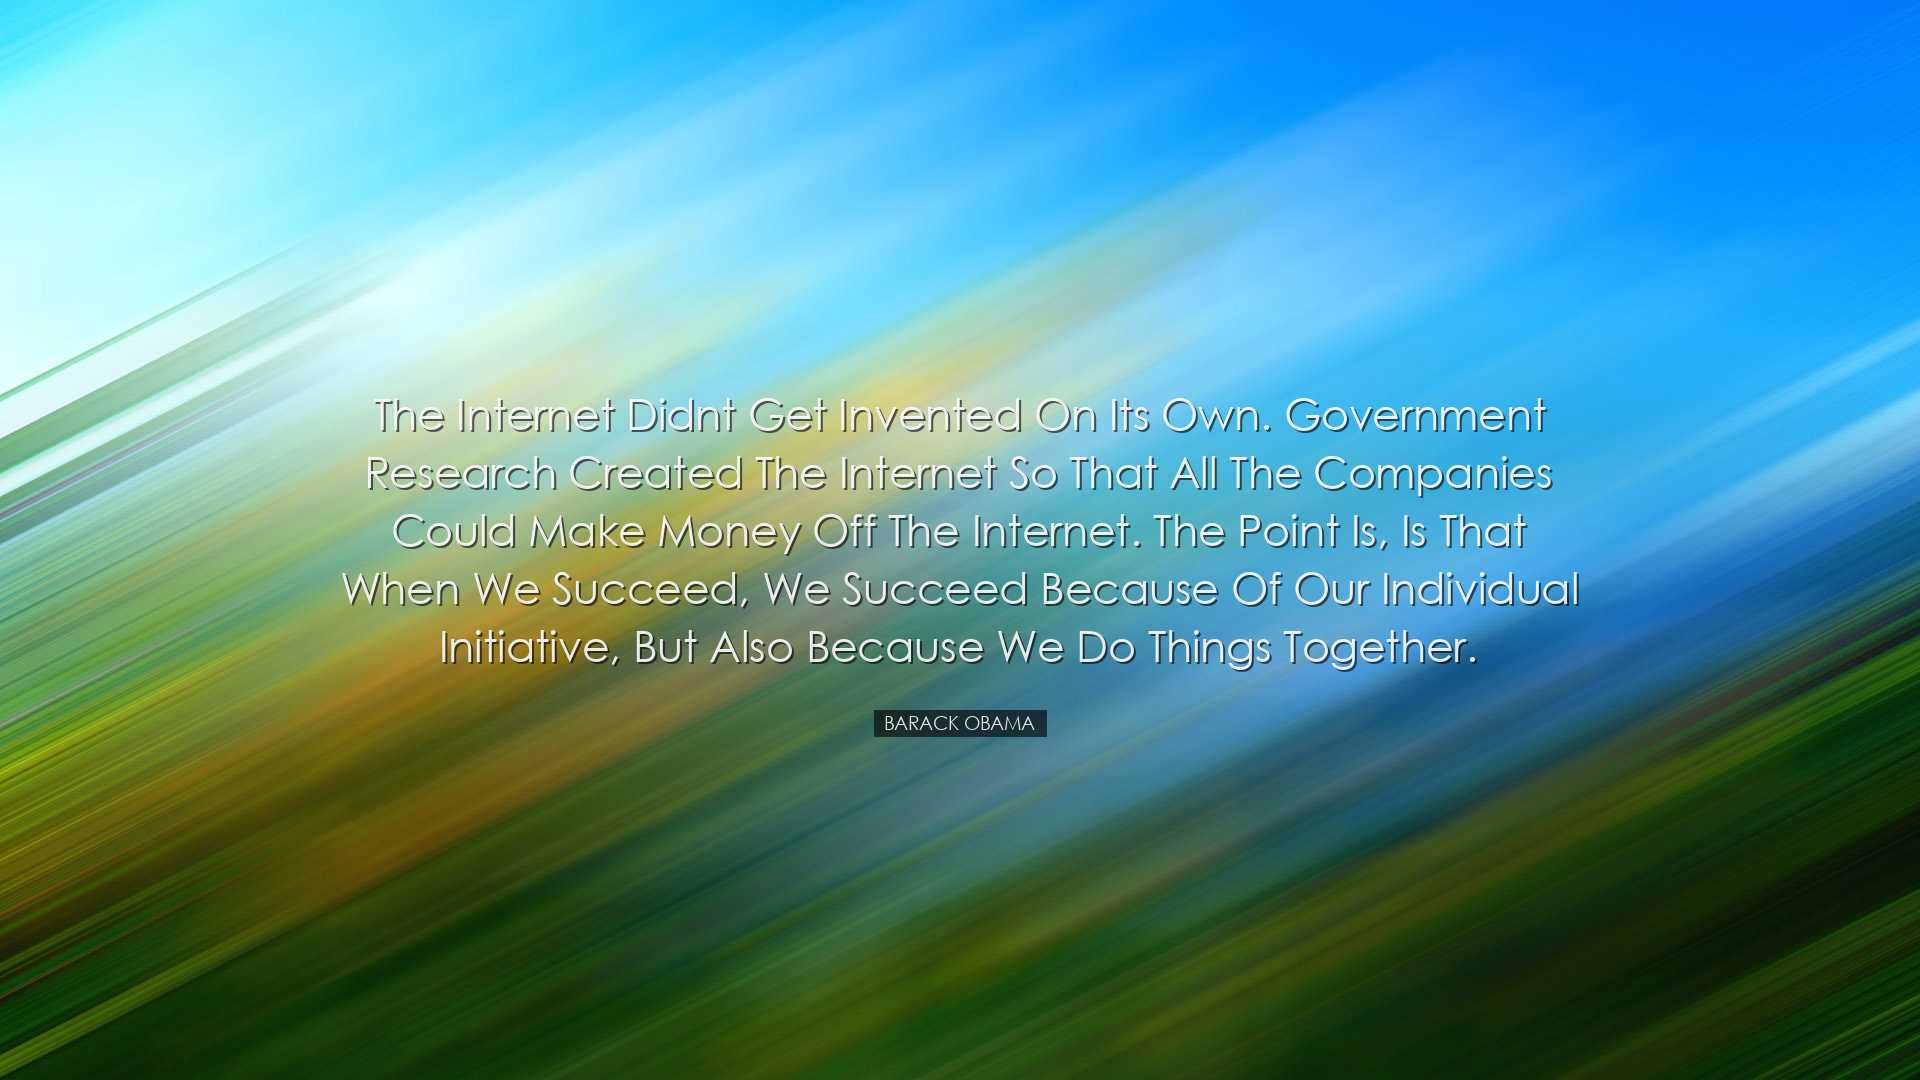 The Internet didnt get invented on its own. Government research cr